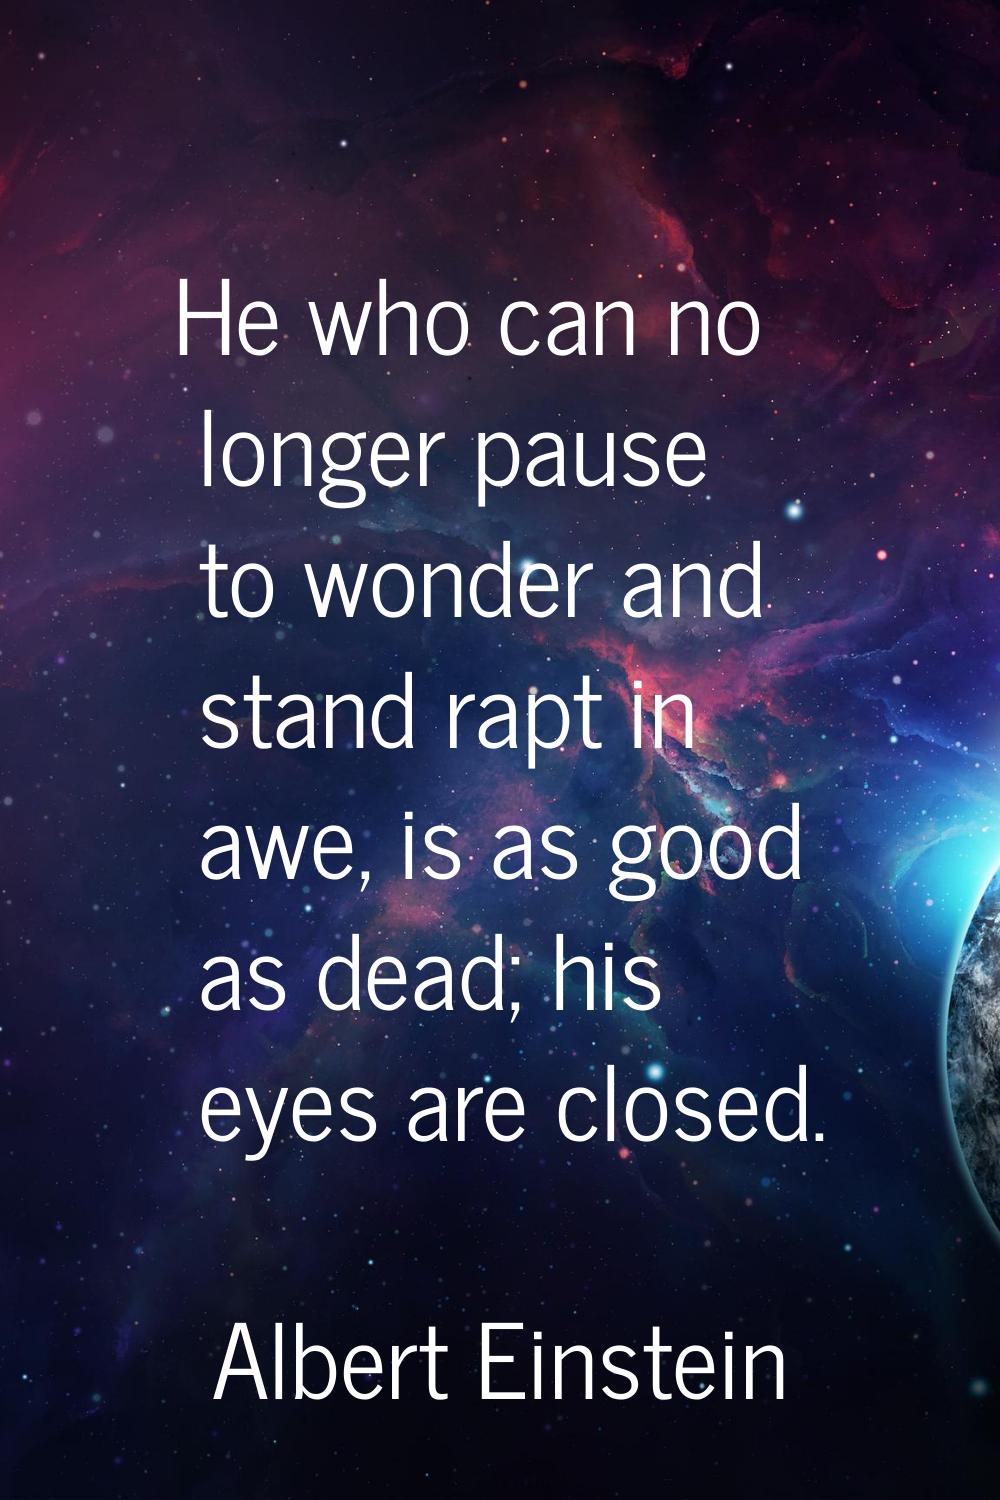 He who can no longer pause to wonder and stand rapt in awe, is as good as dead; his eyes are closed